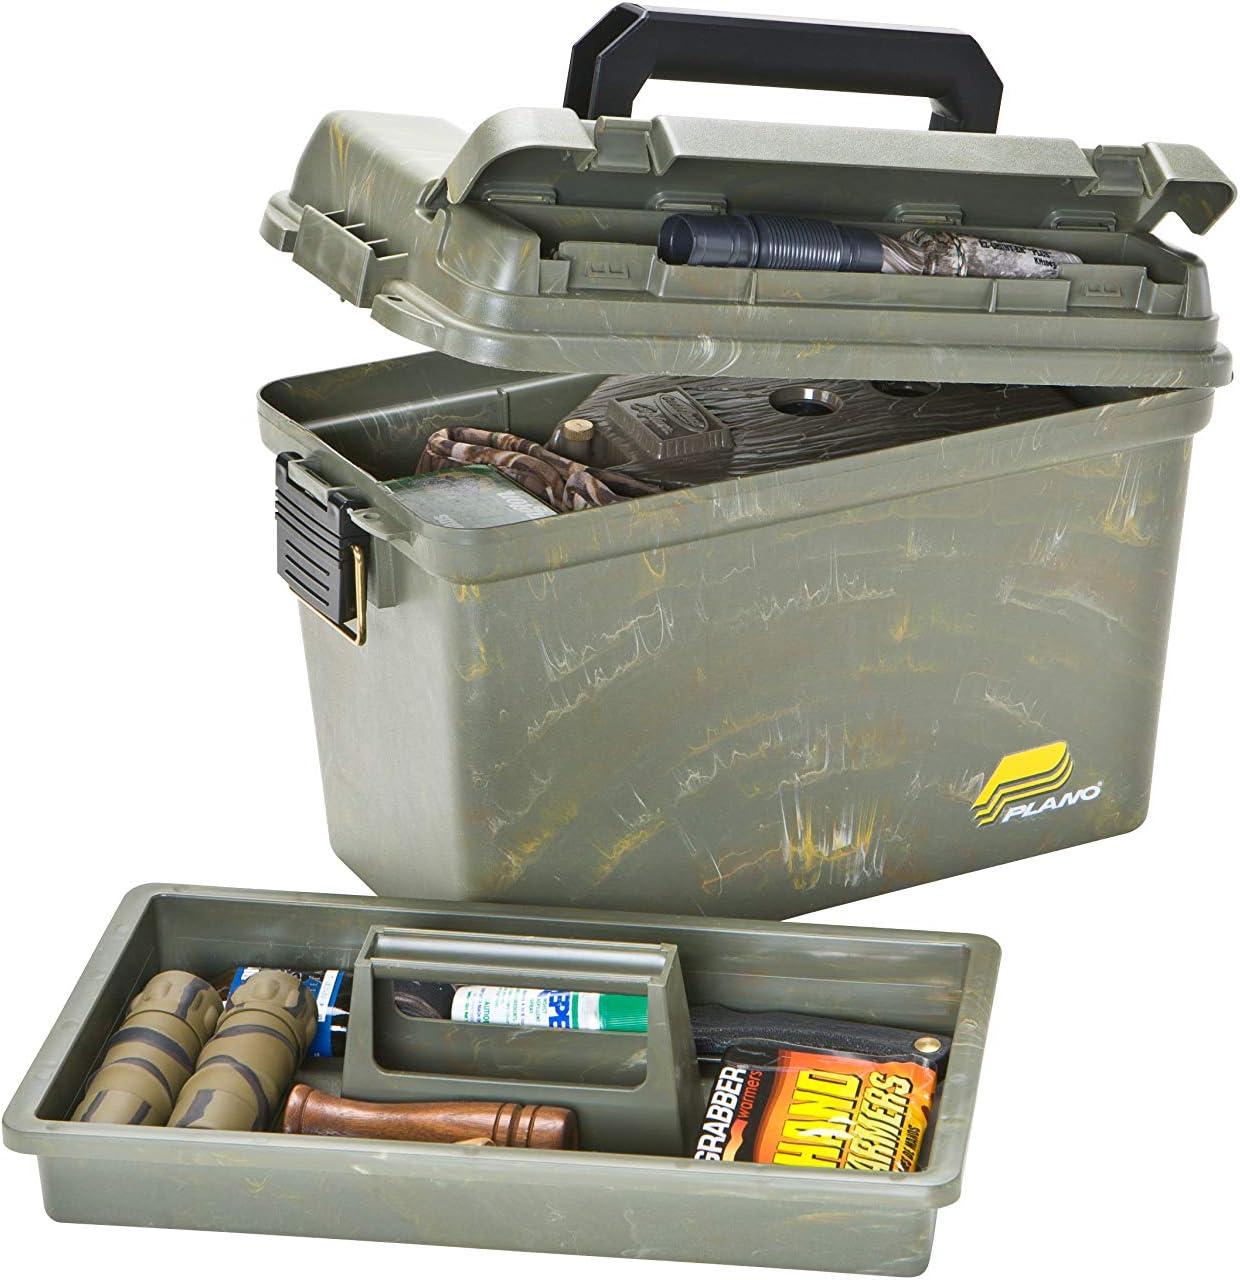 Plano Field Box/Ammo Can Test: Water Resistant? Or Not? 